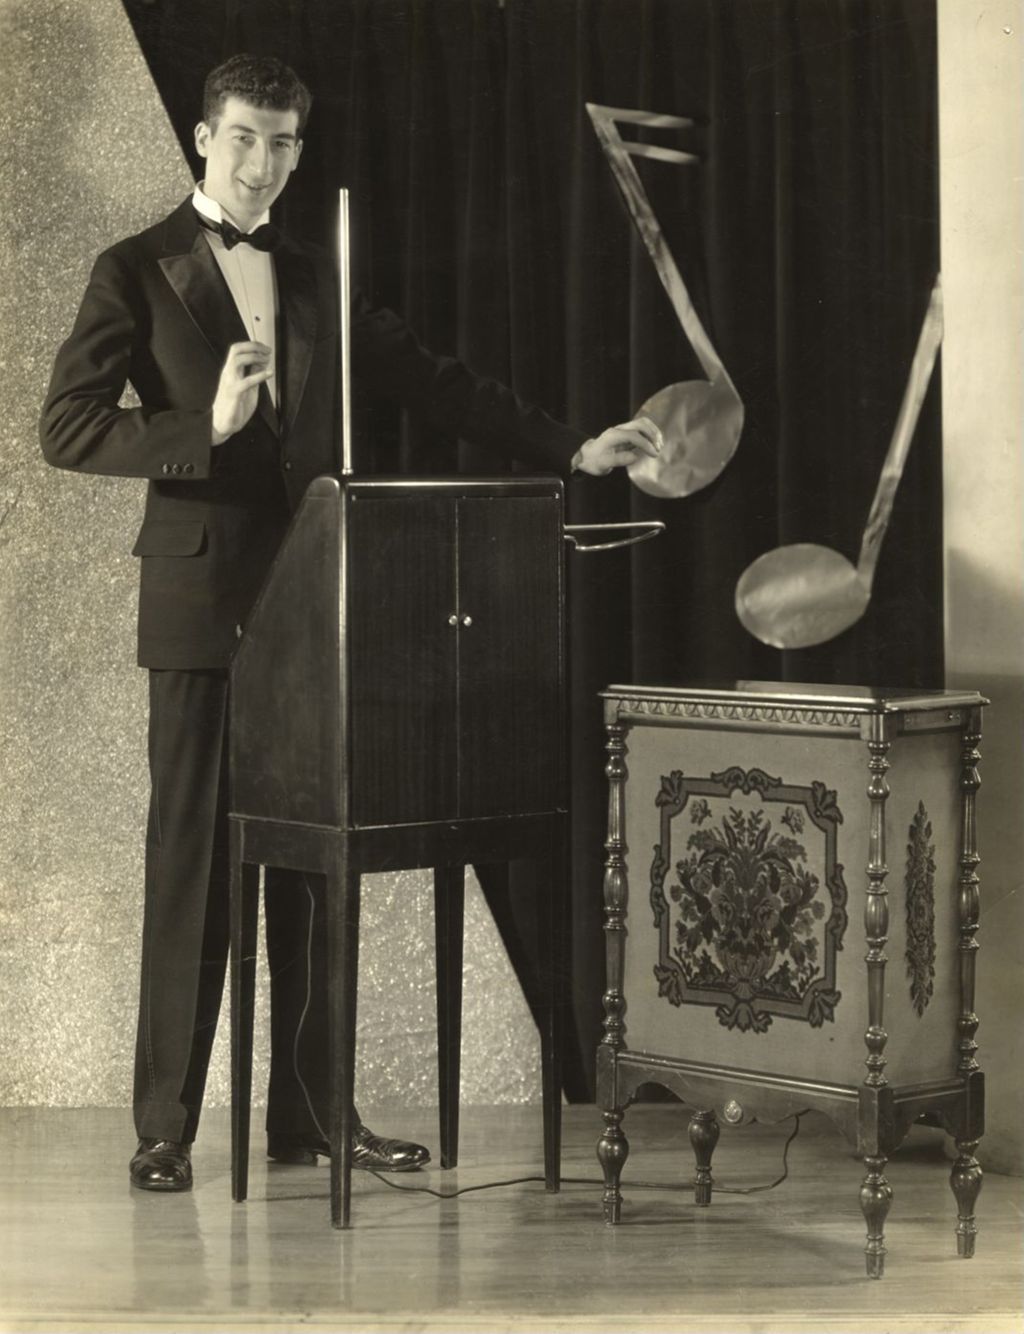 Charles Stein demonstrates the use of a theremin musical instrument